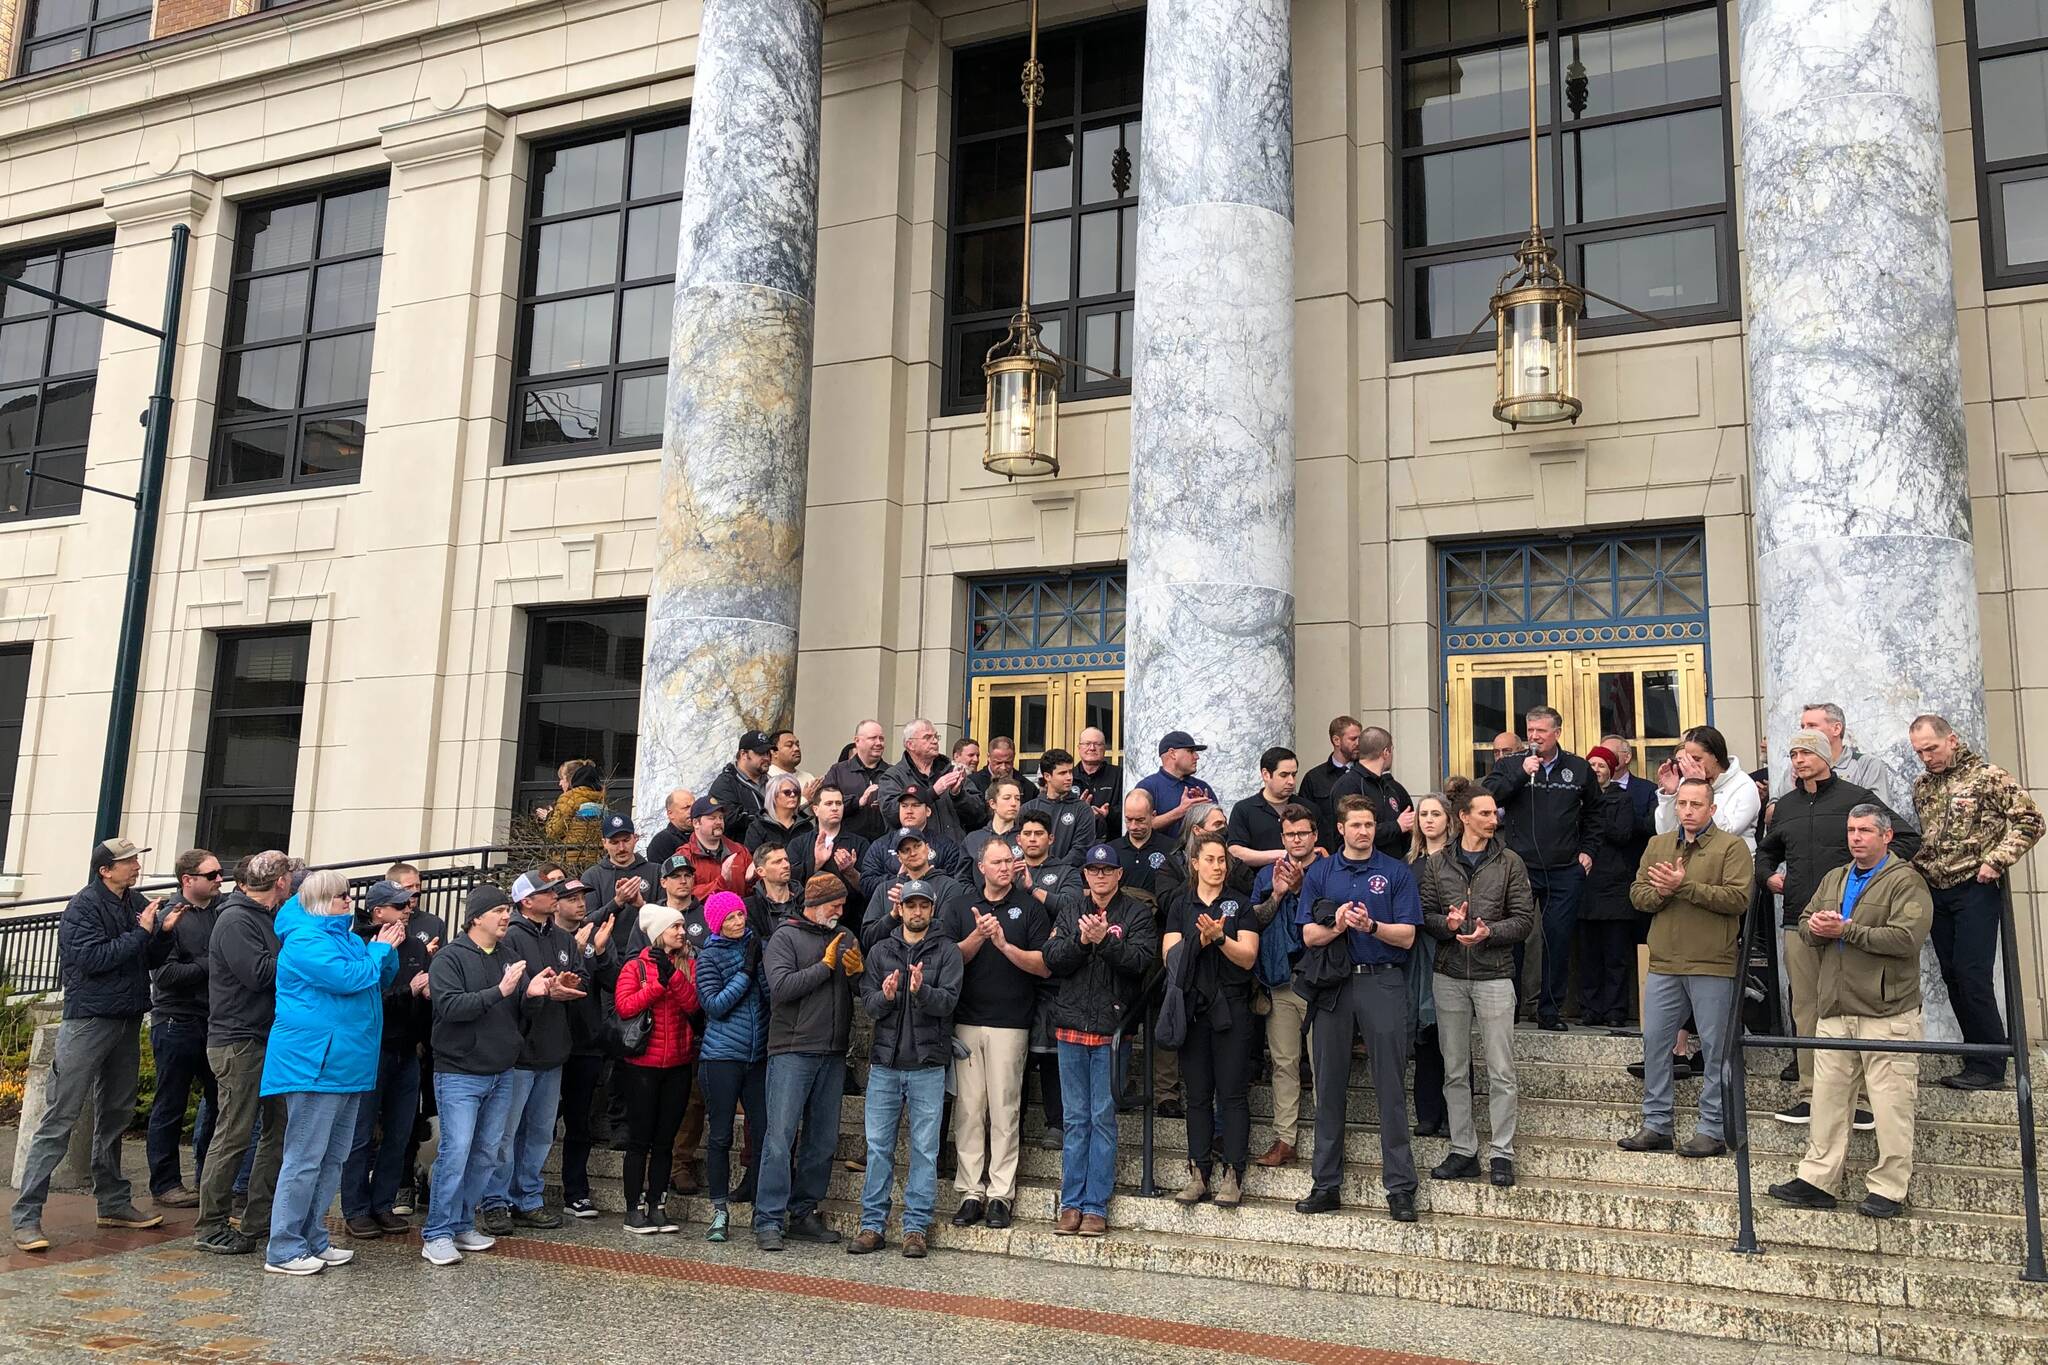 State and municipal public safety employees gathered on the steps of the Alaska State Captiol on Thursday, March 31, 2022, to urge senators to act on a bill to rework the state’s pension system for police, fire fighters and other public safety employees. (Peter Segall / Juneau Empire)